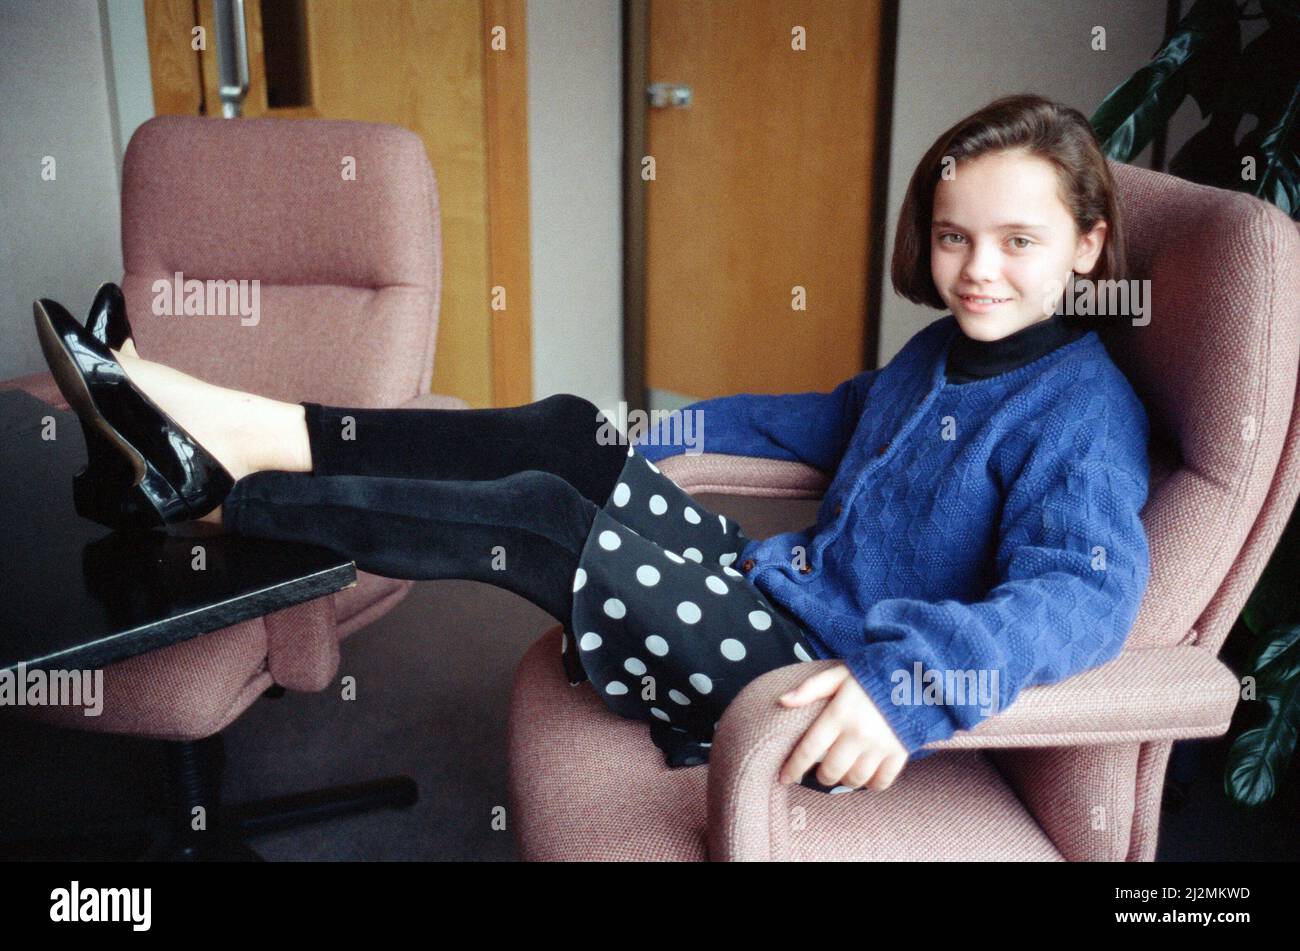 11 year old Christina Ricci, junior star in the blockbuster movie "The Addams Family". 9th December 1991. Stock Photo